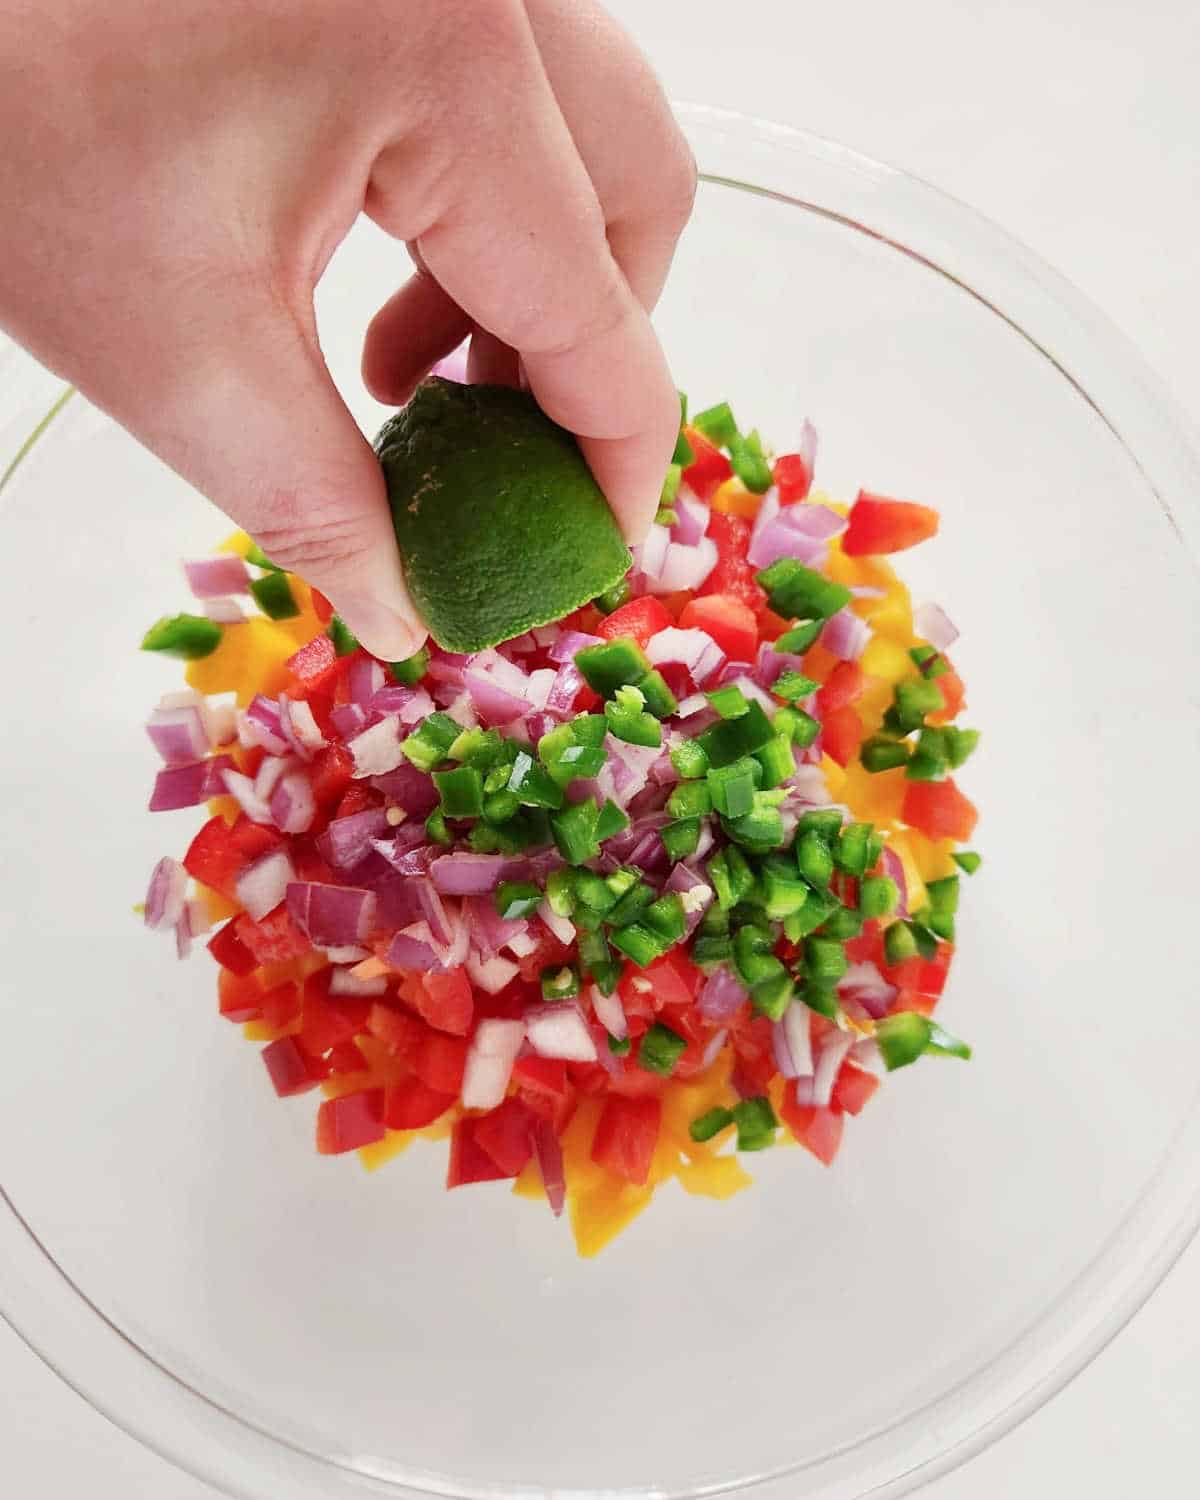 Squeezing lime juice over chopped ingredients for mango peach salsa in a glass bowl on a white surface.